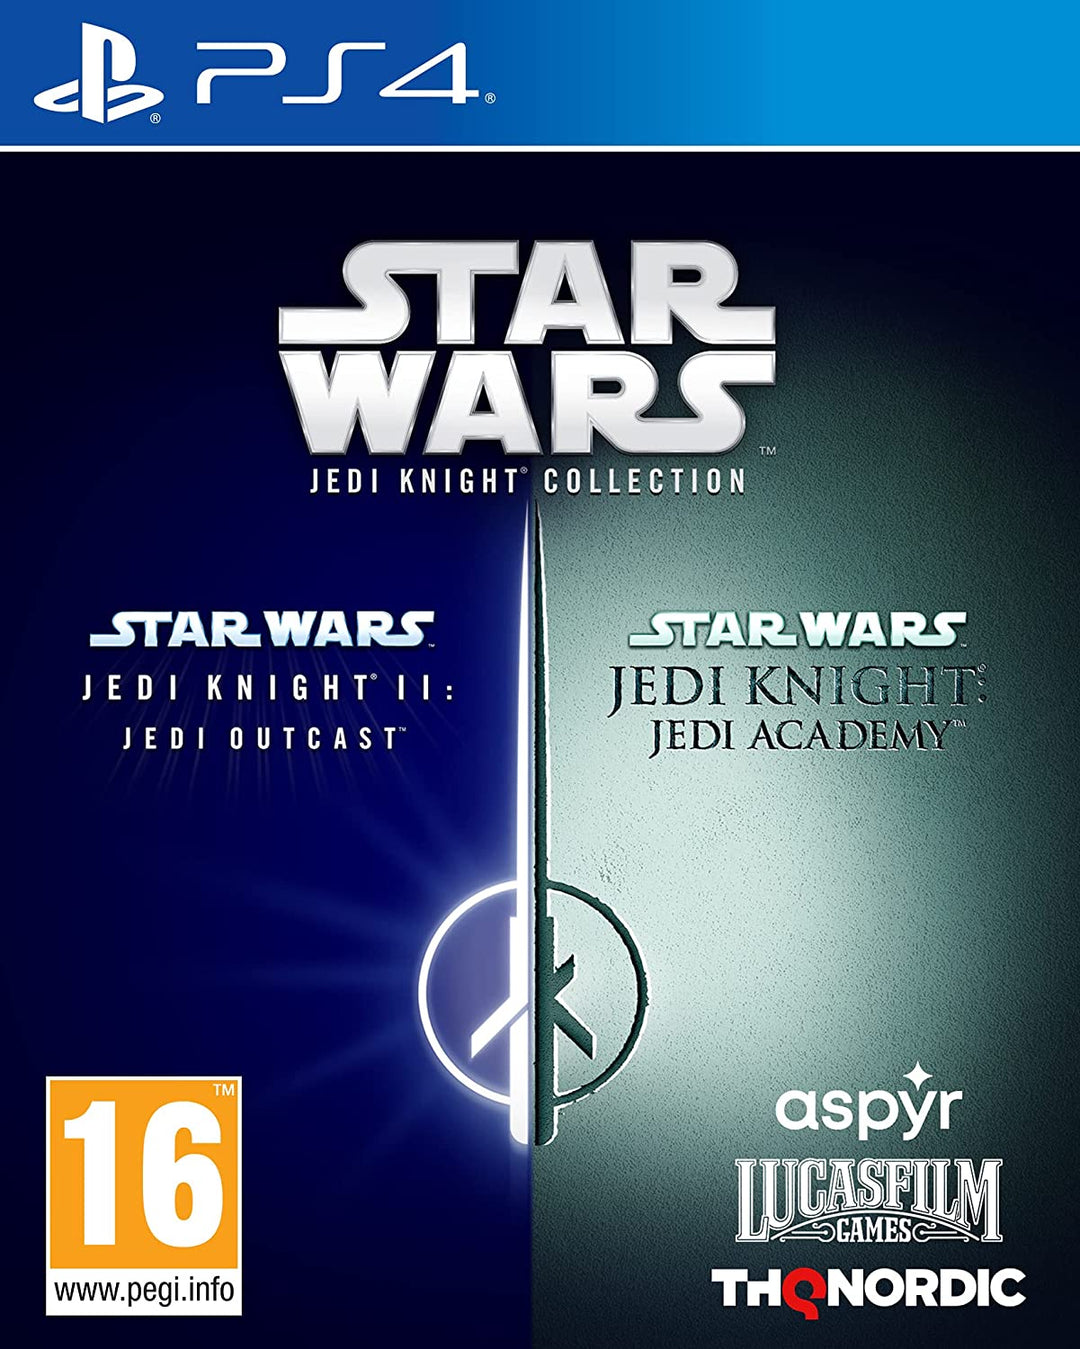 Star Wars Jedi Knight Collection – PlayStation 4 (PS4)